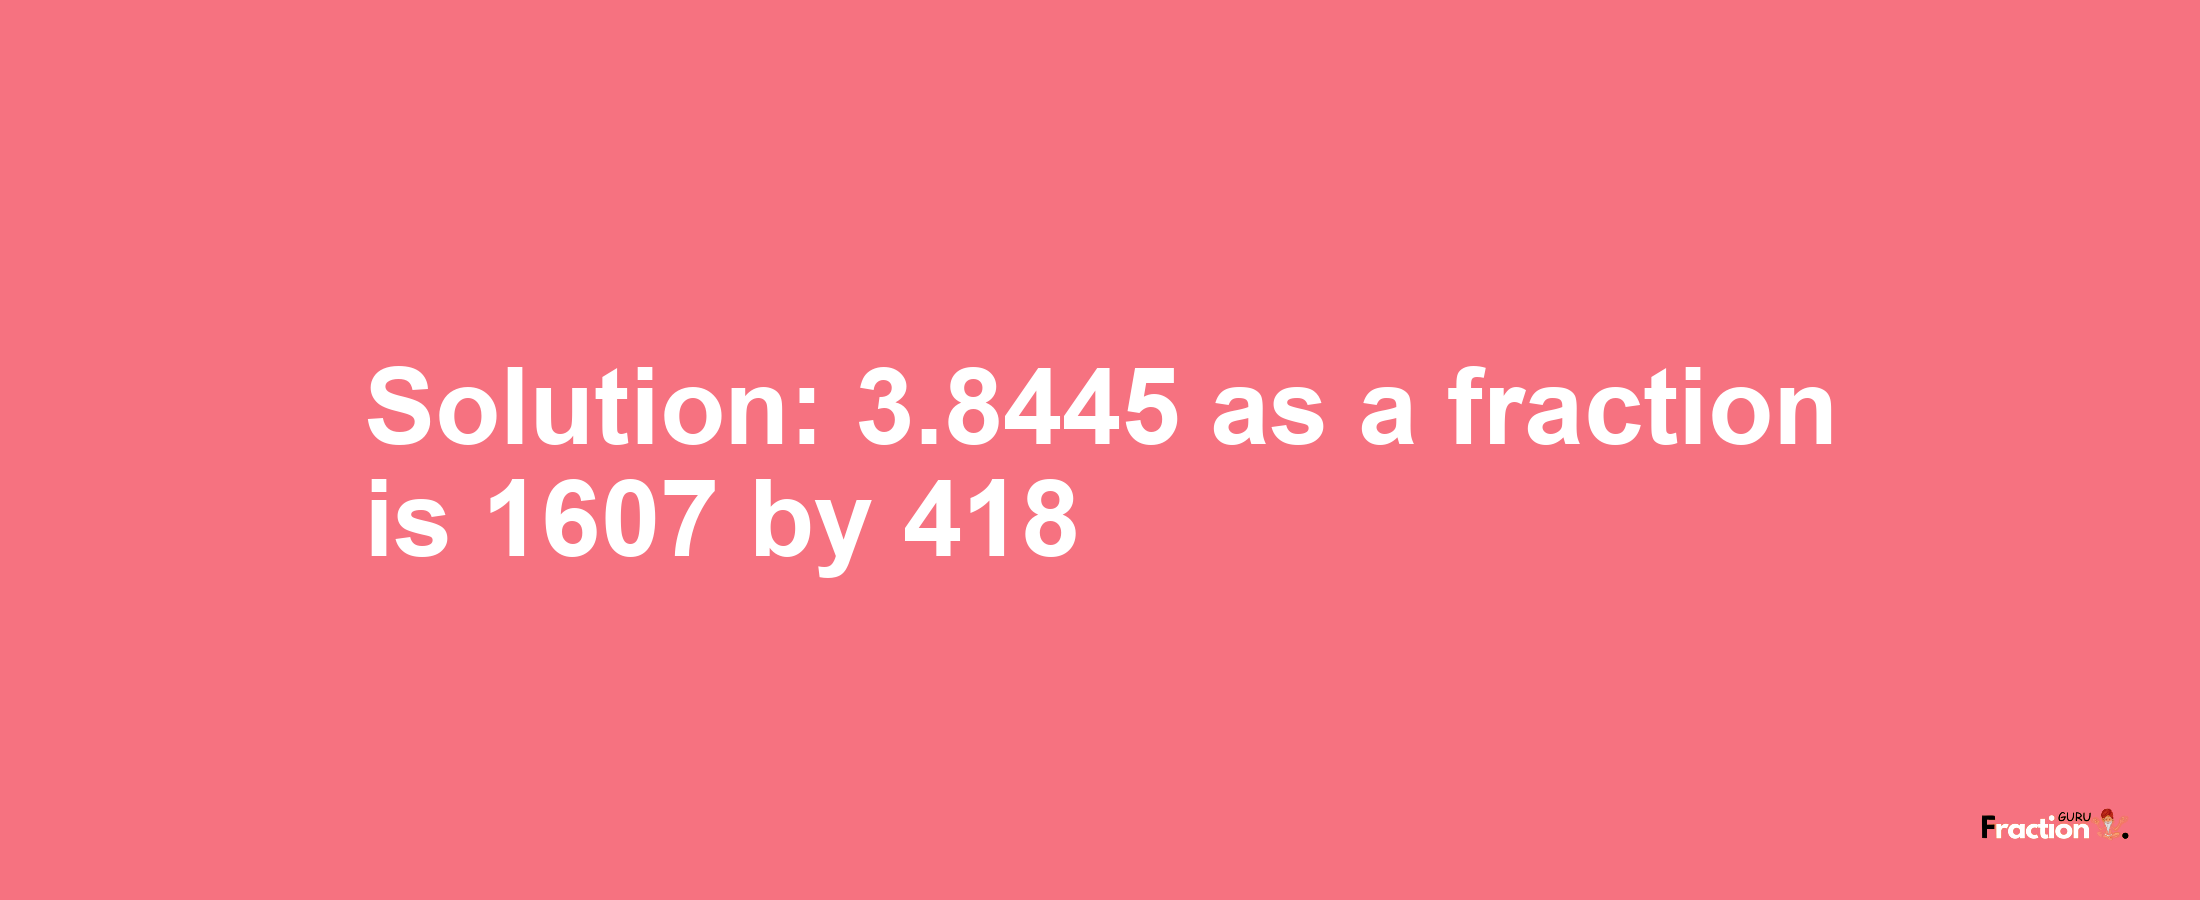 Solution:3.8445 as a fraction is 1607/418